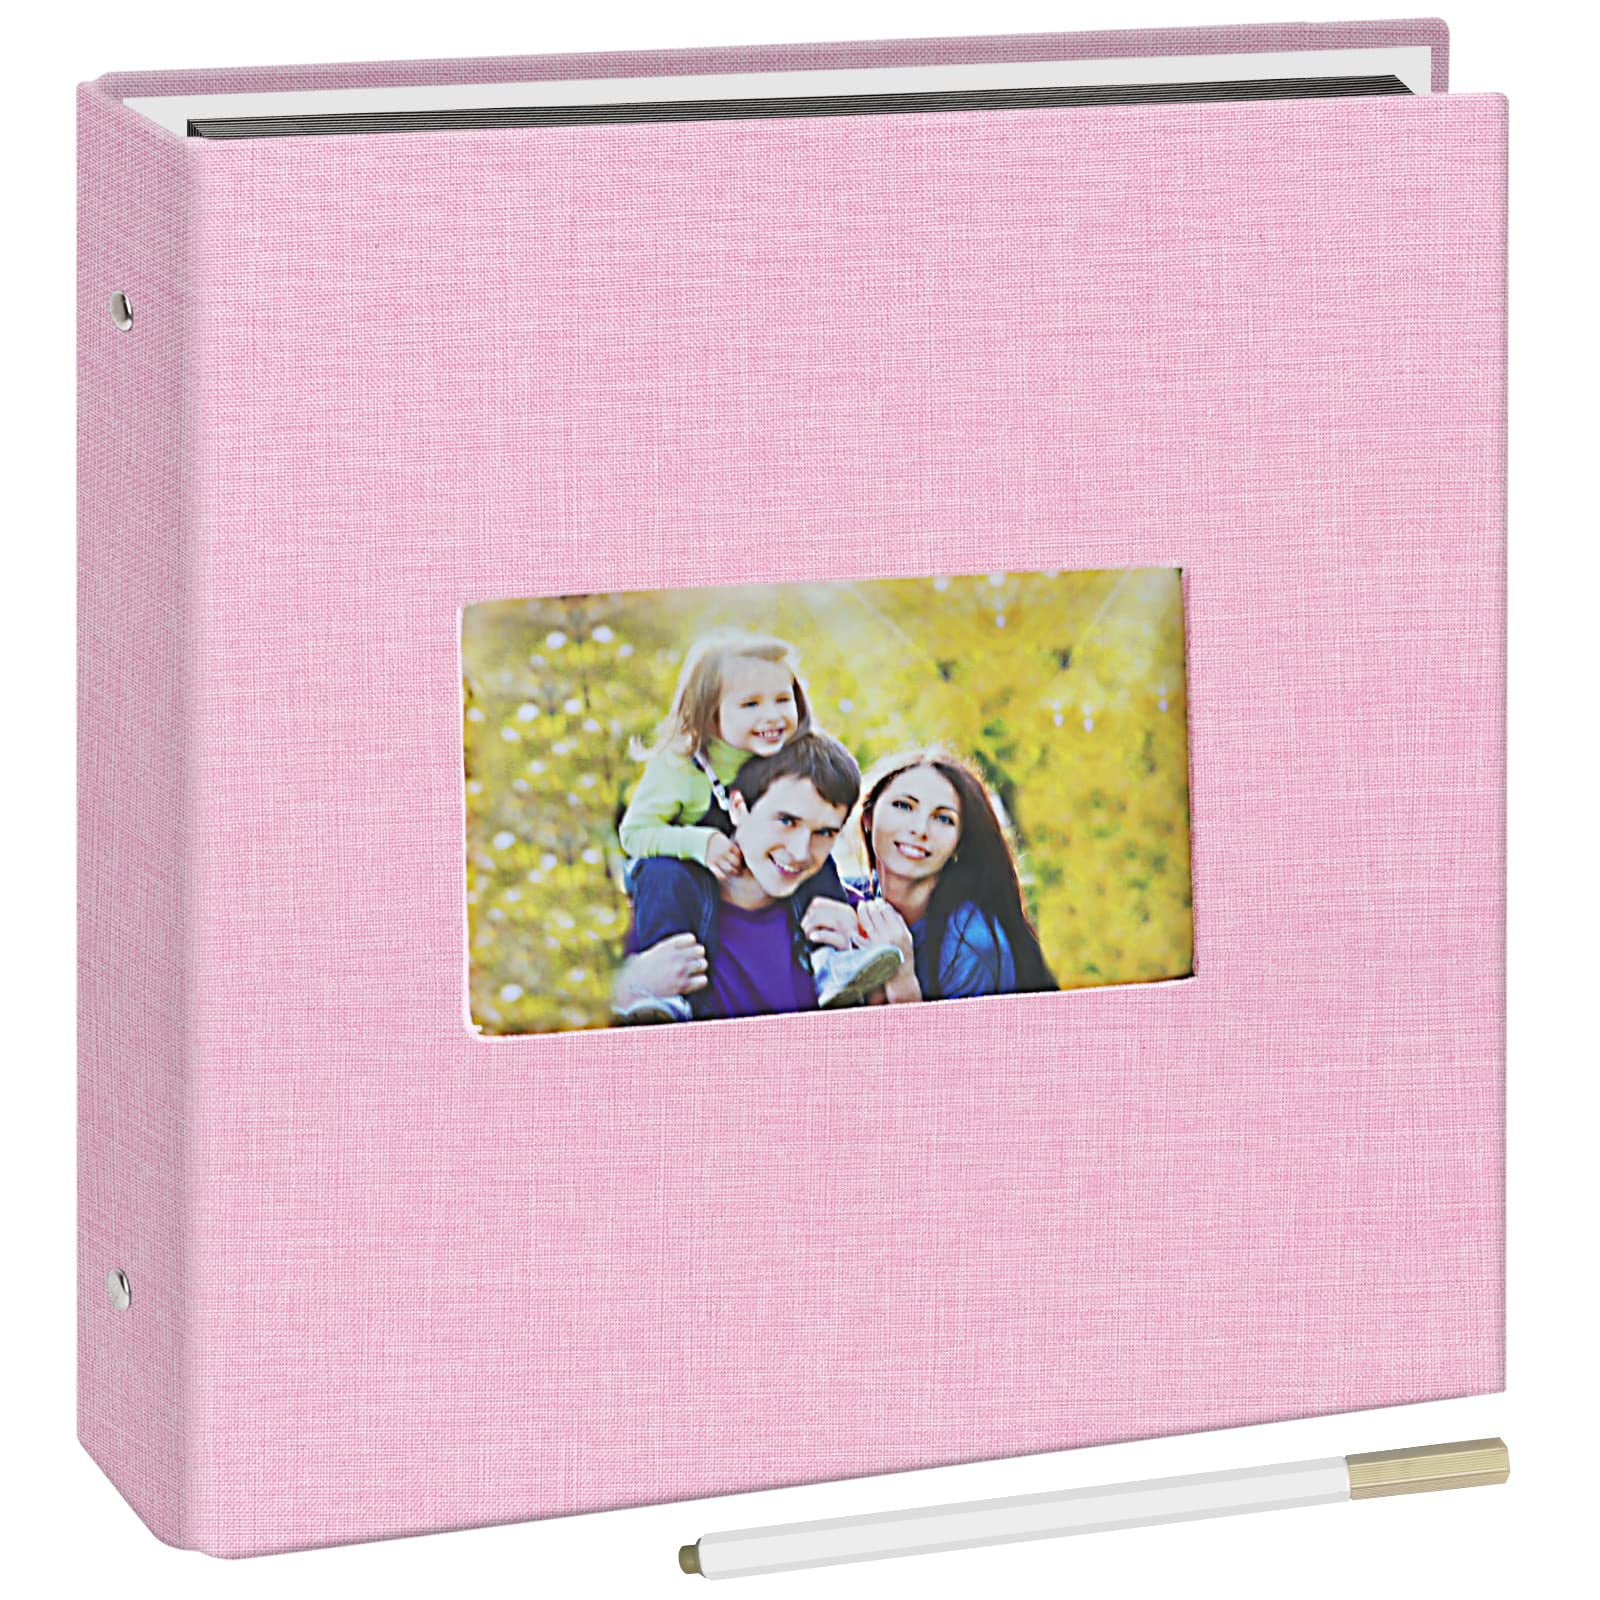 Pssoss Large DIY Scrapbook Photo Album 100 Pages with Writing Space for 3x5 4x6 5x7 6x8 8x10 Picture, Size: 13 x 12 Inches 100 Pages, Black